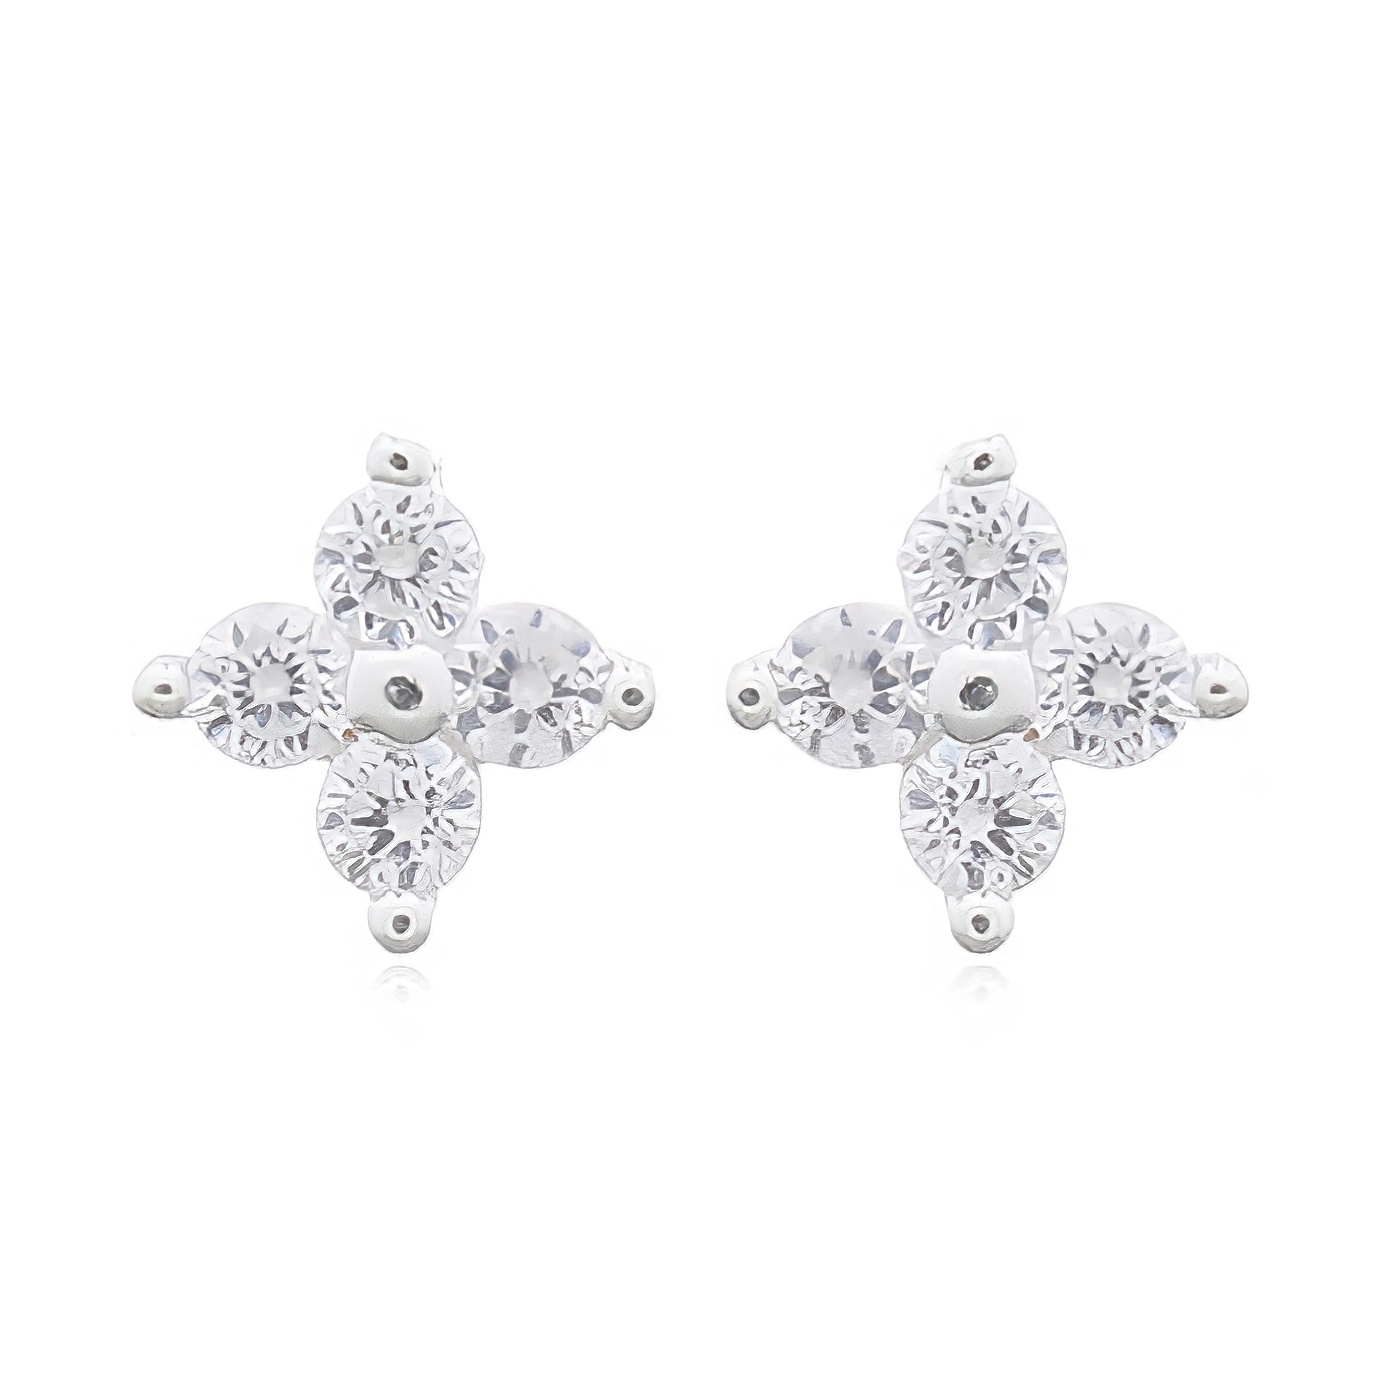 Adorable Four Petals Flower White CZ 925 Silver Stud Earrings by BeYindi 